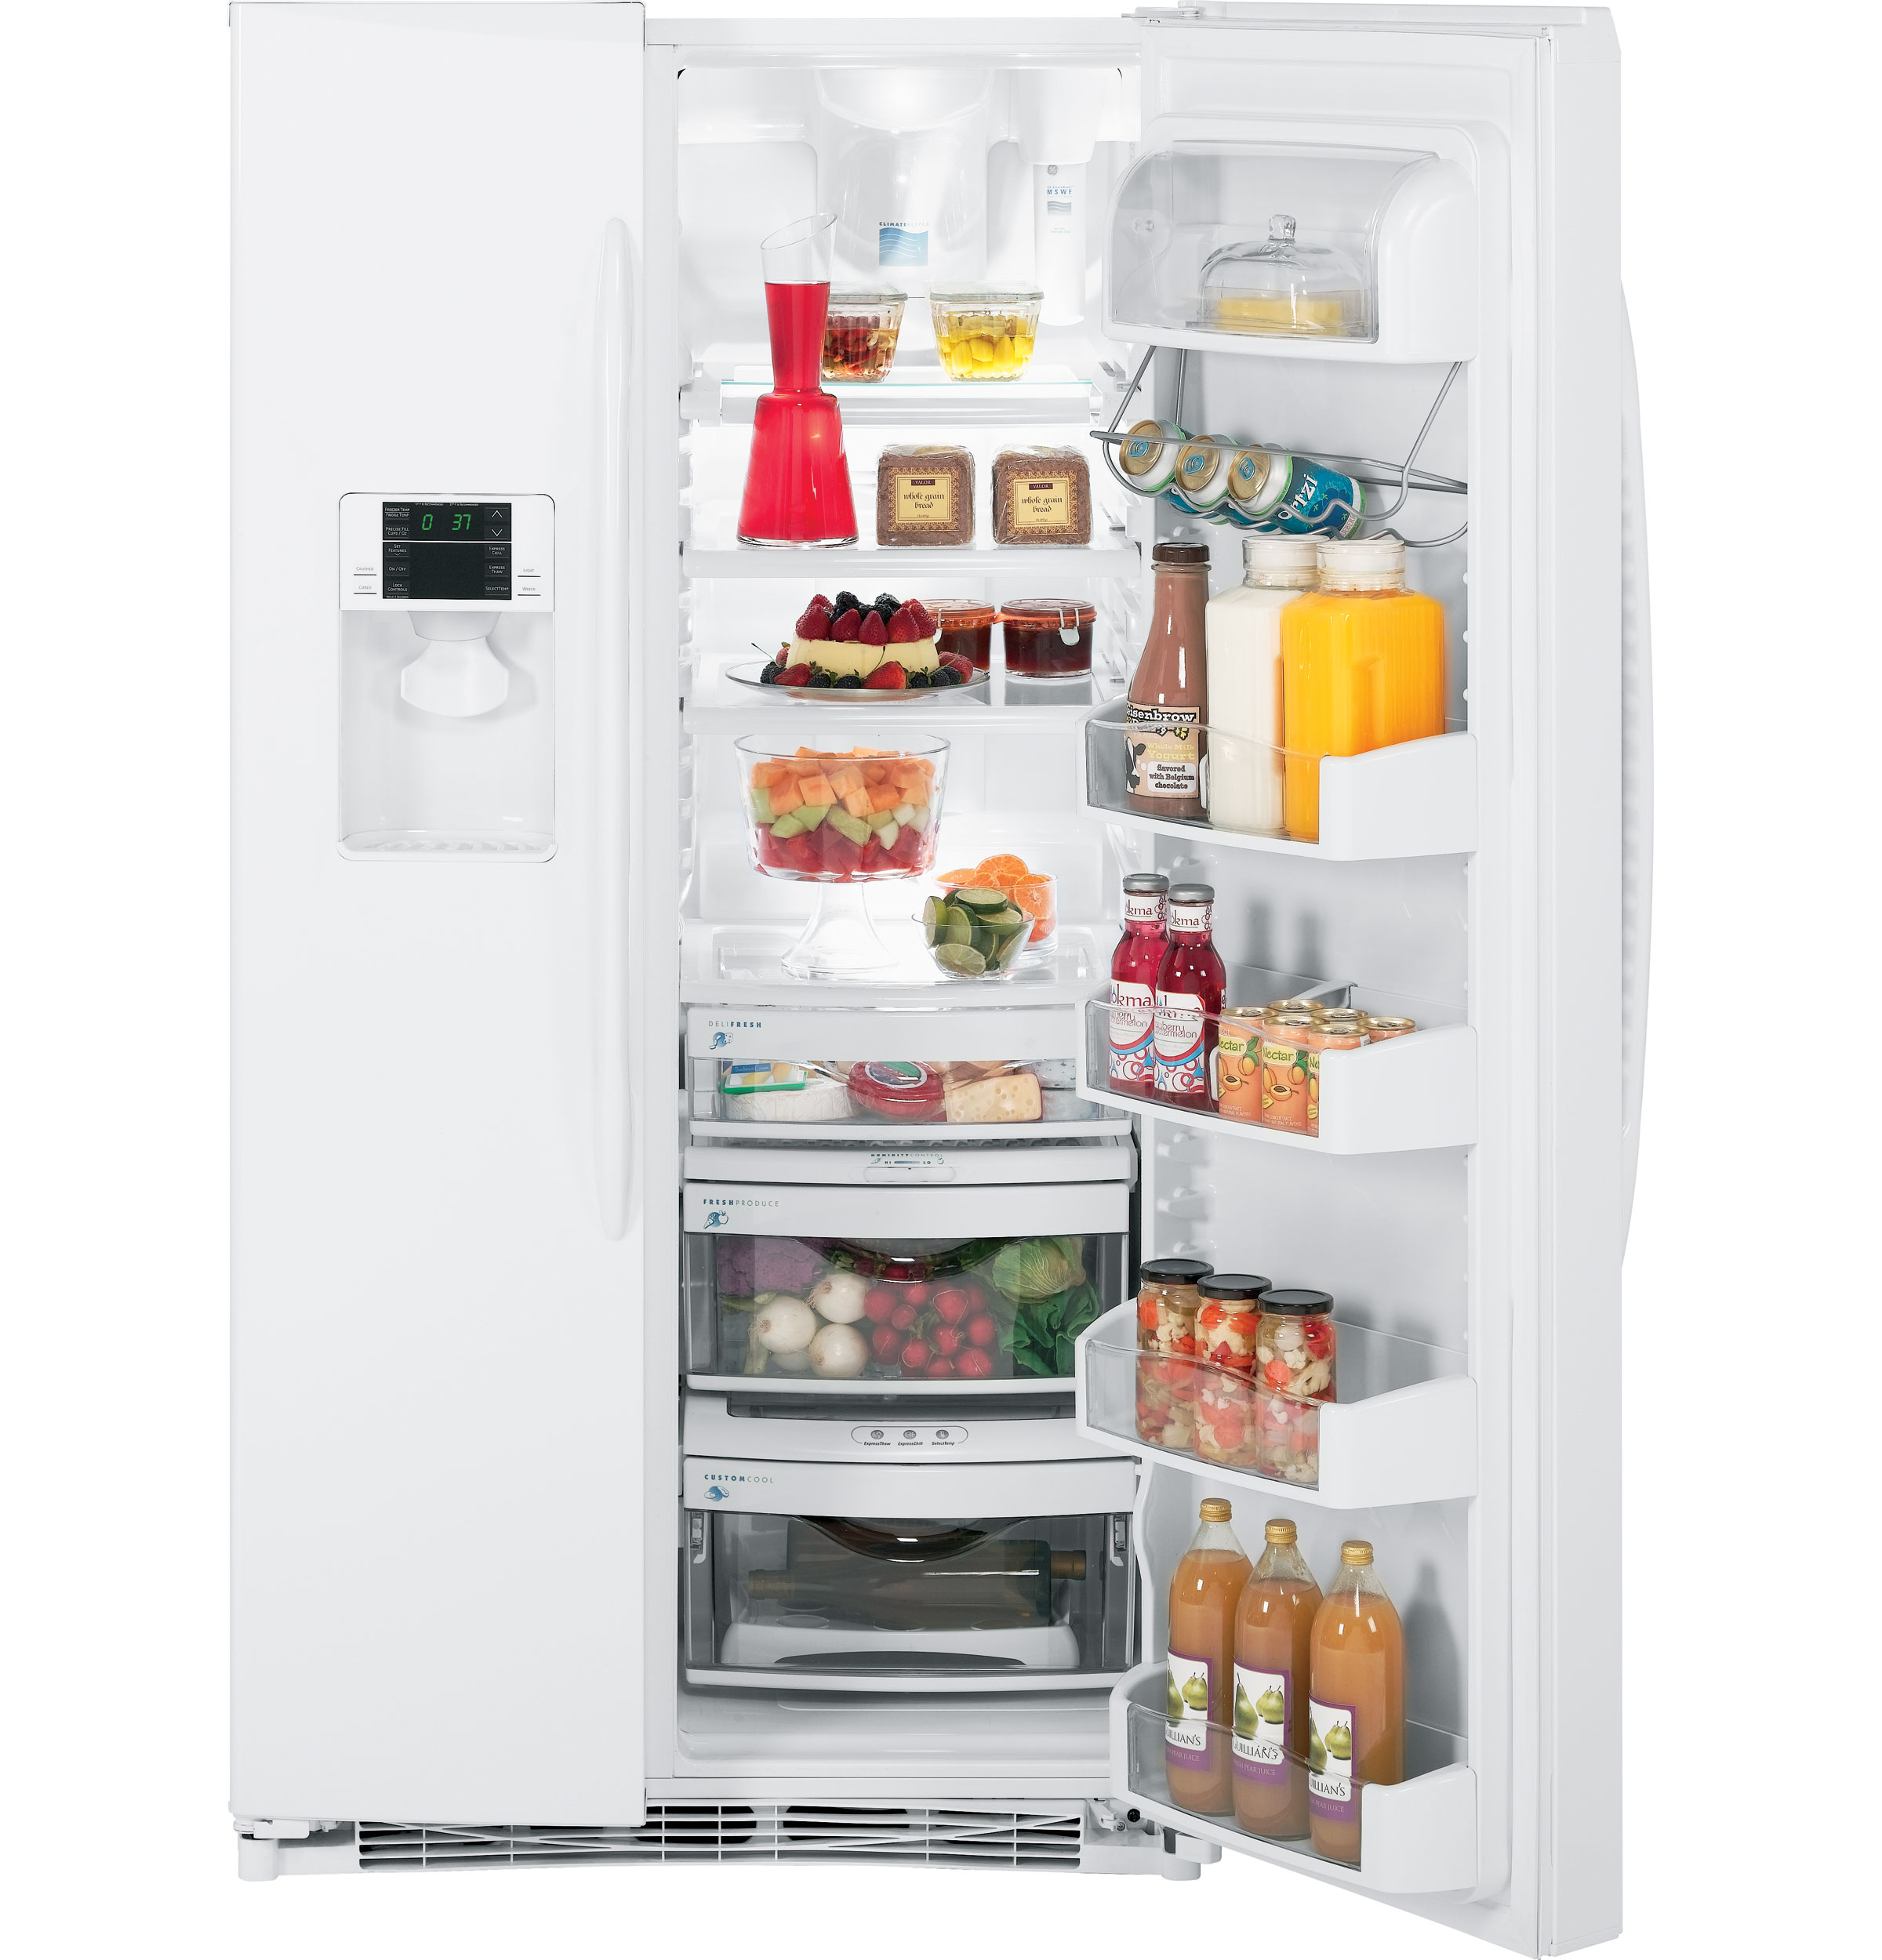 GE® ENERGY STAR® 25.5 Cu. Ft. Side-By-Side Refrigerator with Dispenser